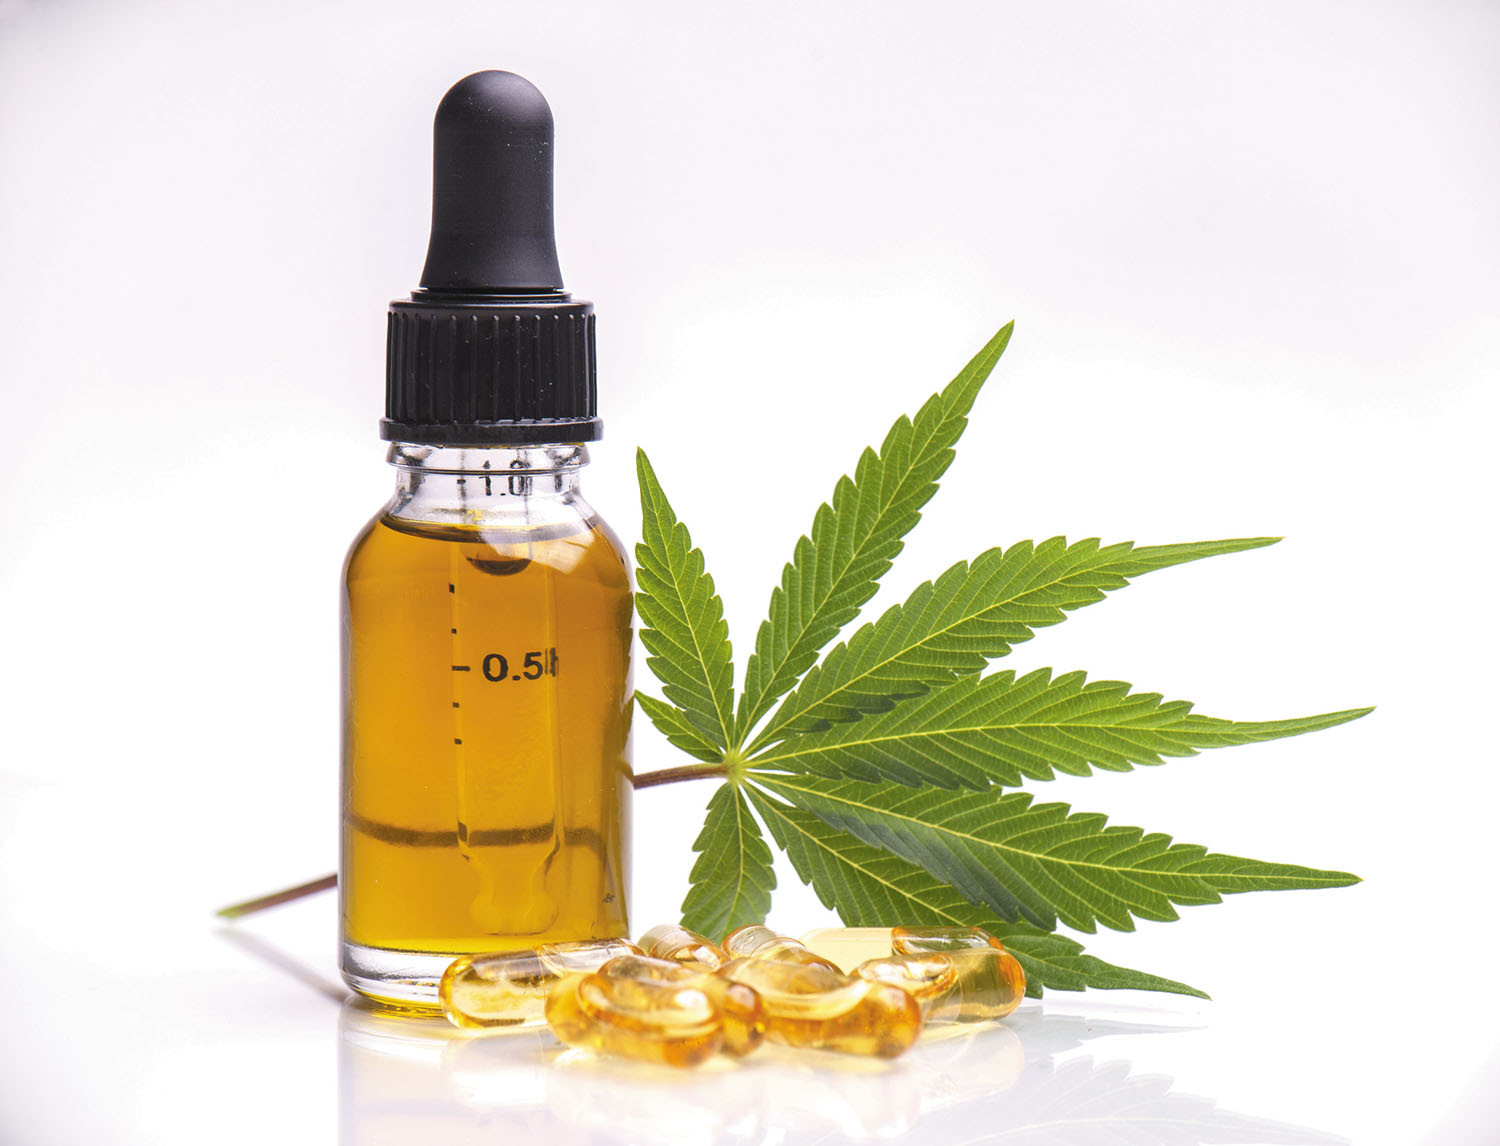 A closed transparent tincture bottle filled with CBD oil sitting beside a cannabis leaf and CBD capsules